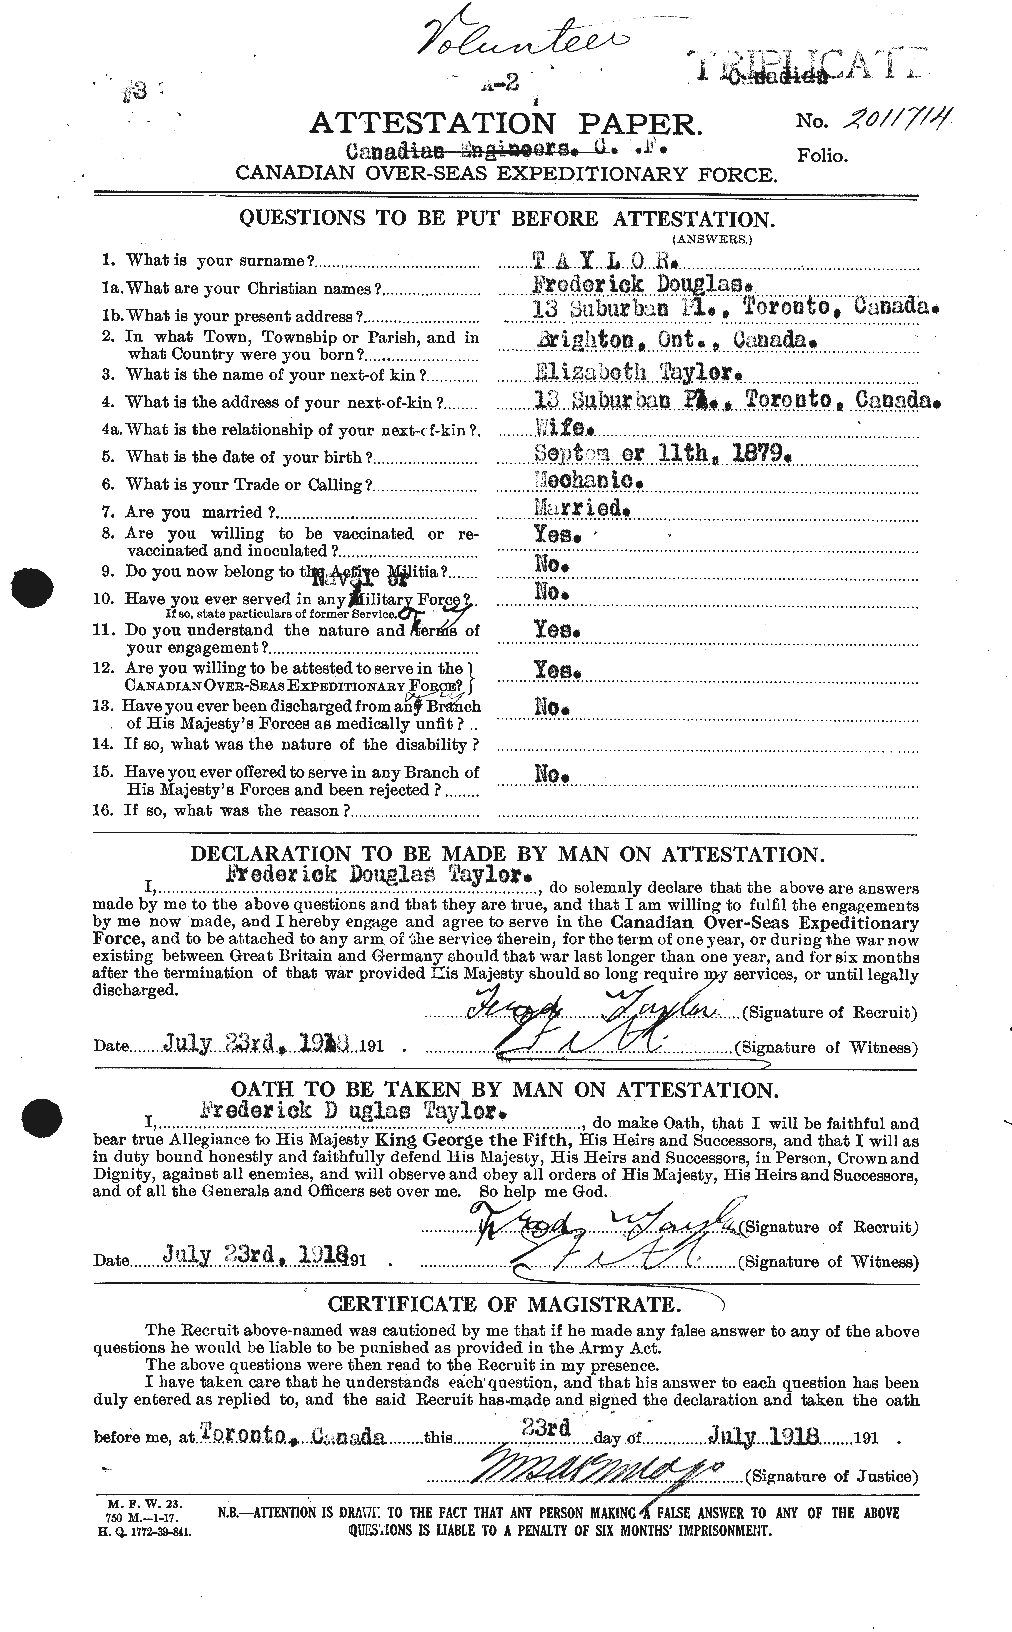 Personnel Records of the First World War - CEF 625796a